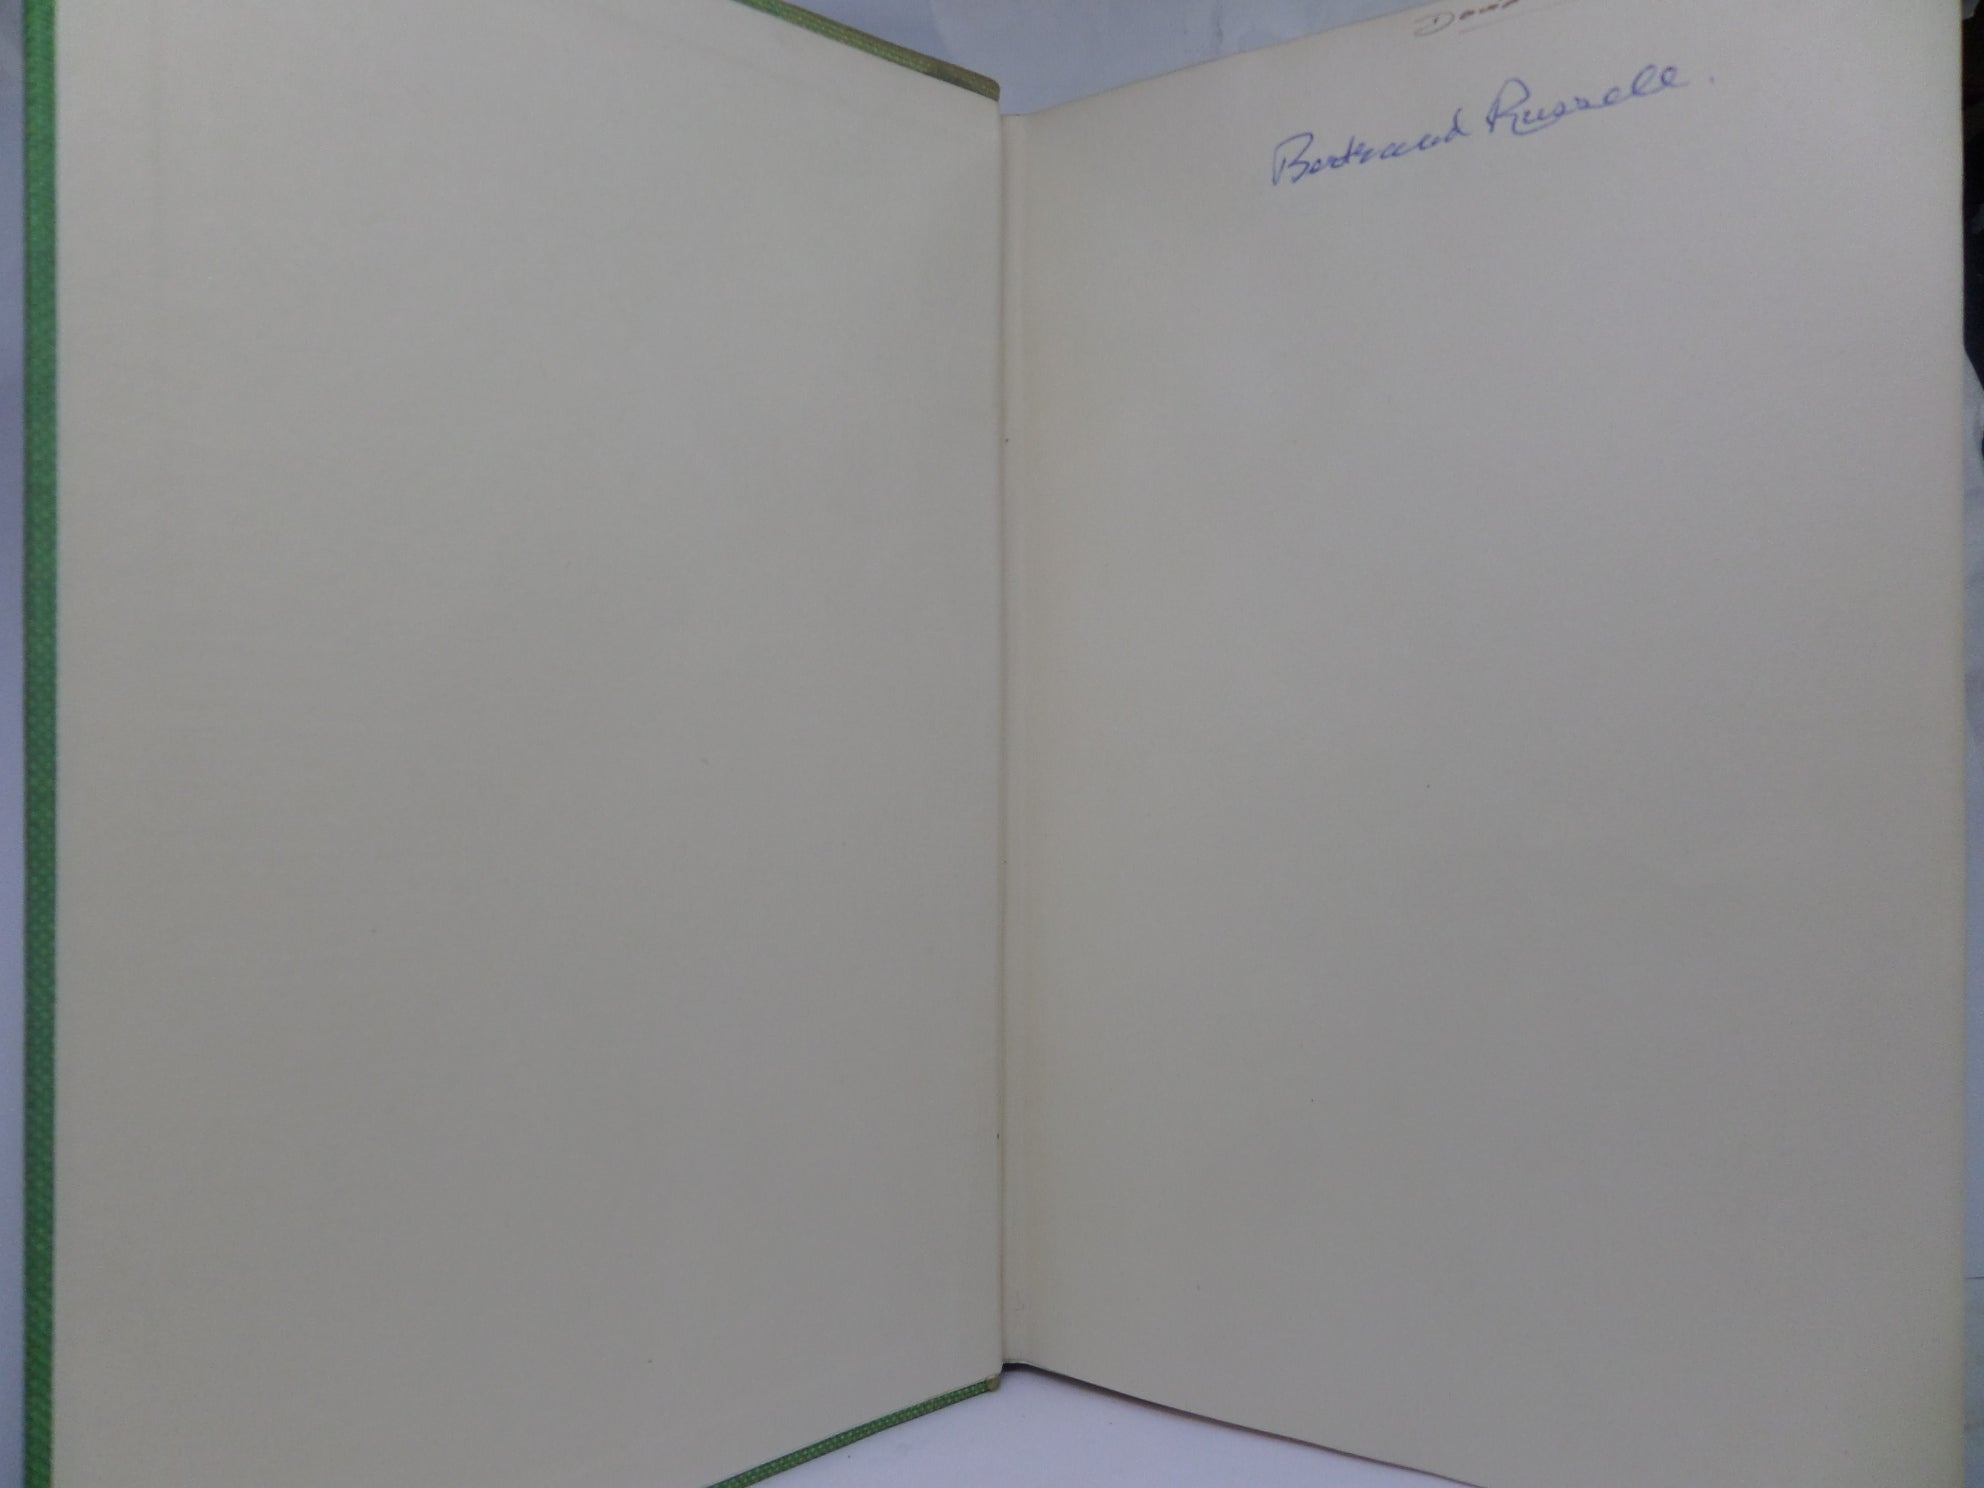 HUMAN SOCIETY IN ETHICS AND POLITICS BY BERTRAND RUSSELL 1958 SIGNED BY AUTHOR